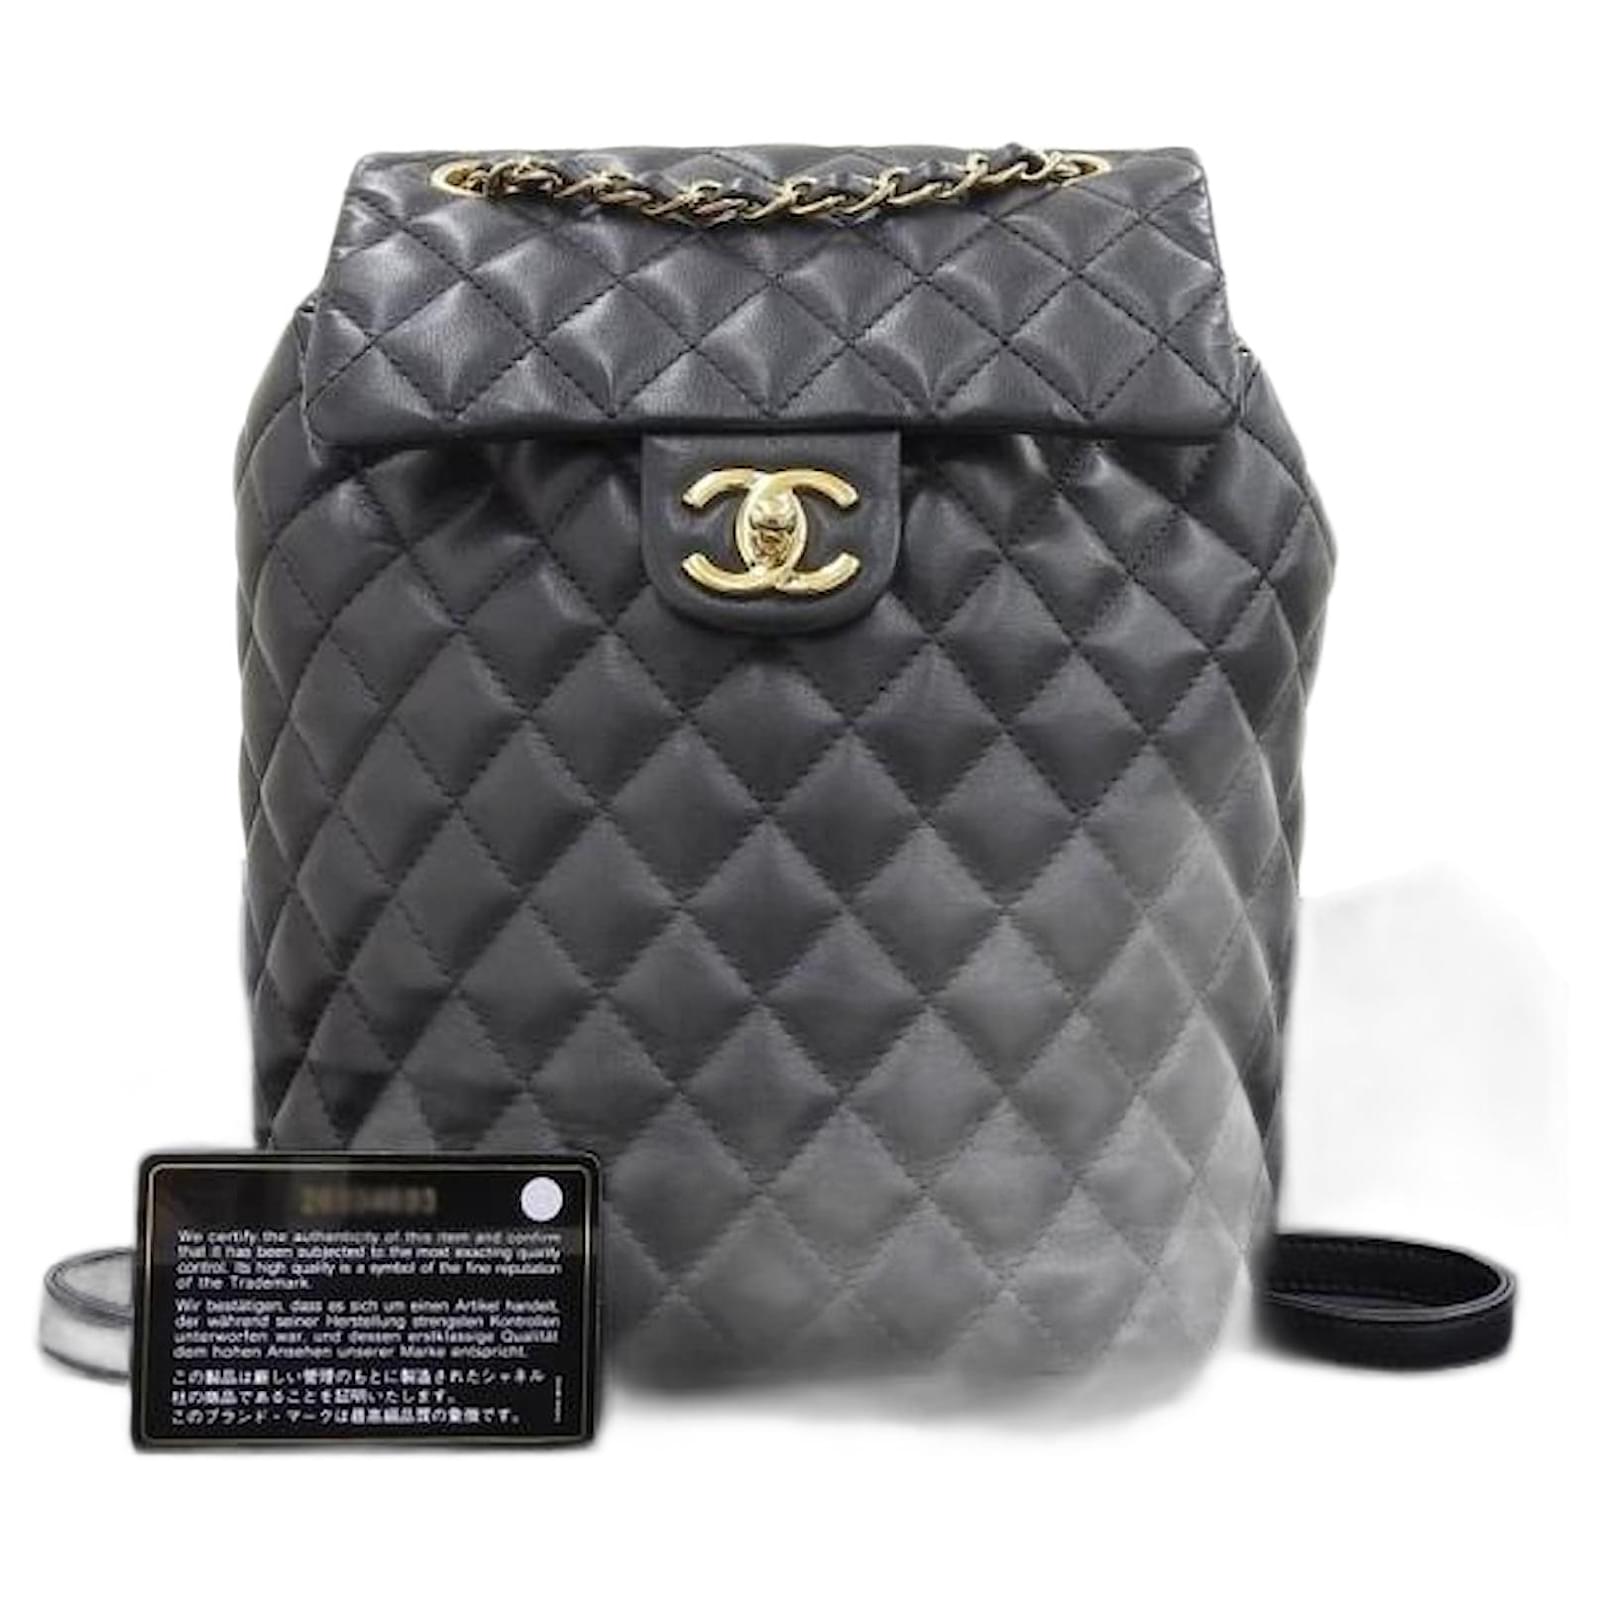 CC Quilted Leather Drawstring Backpack A91121